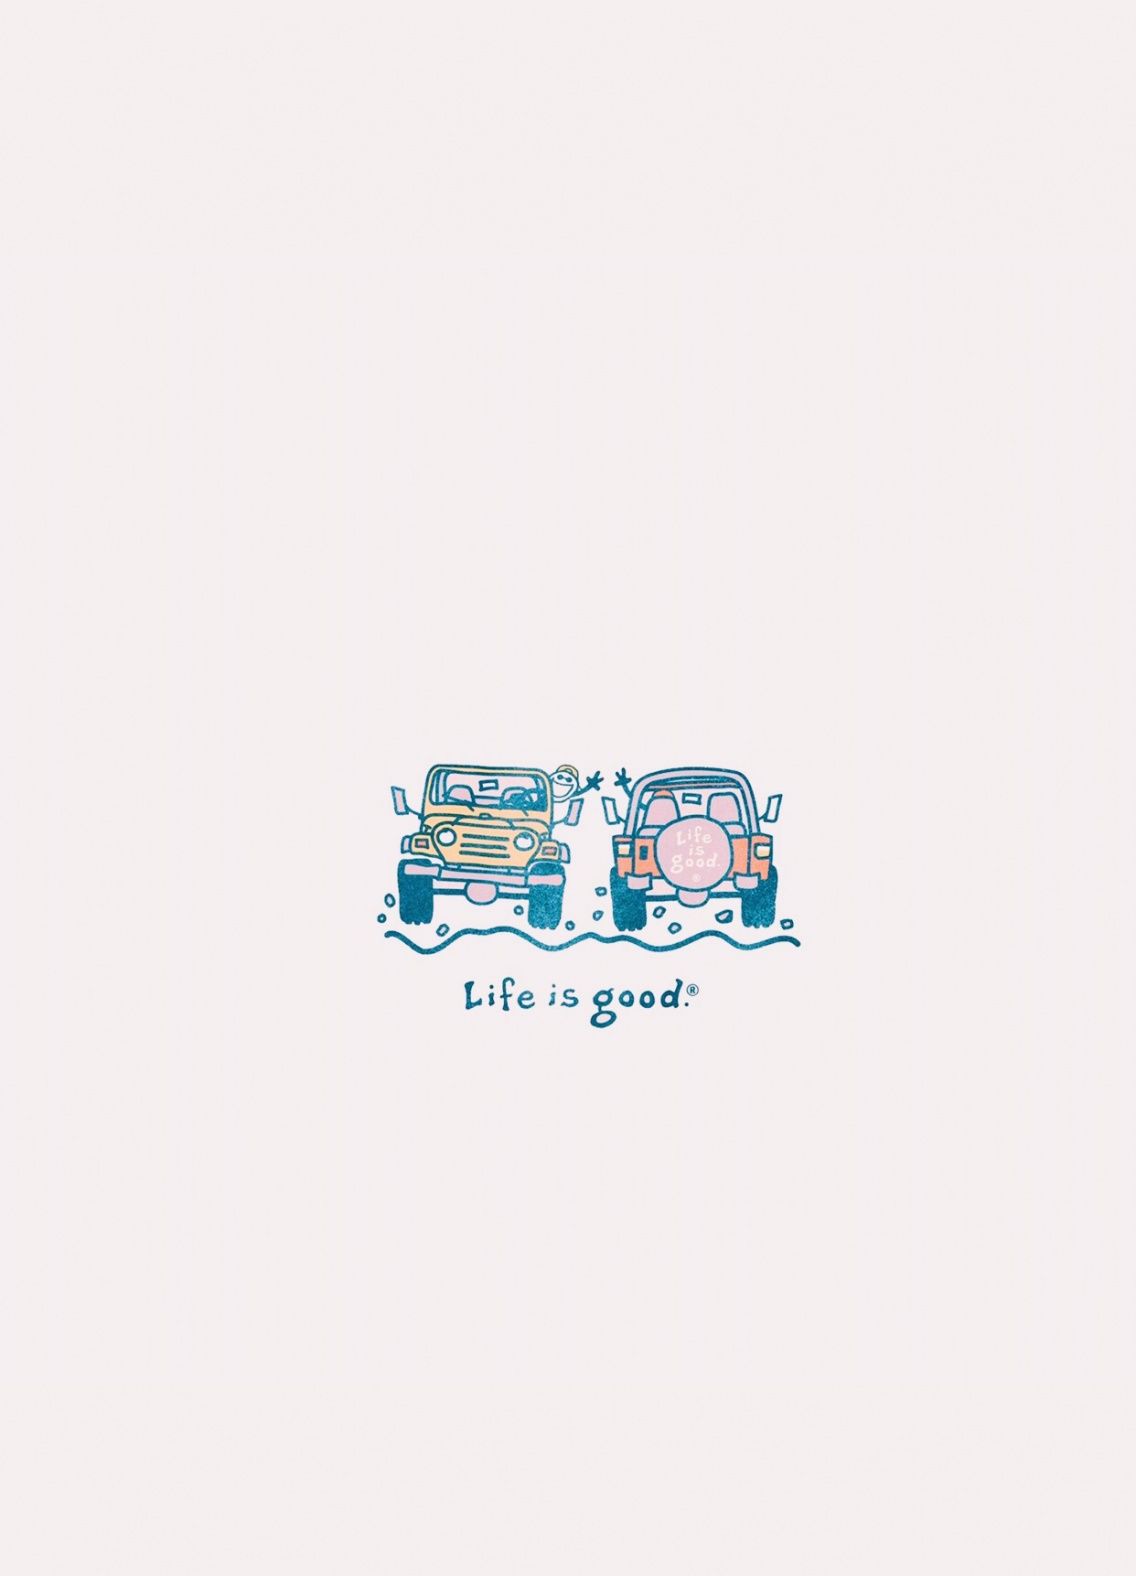 An illustration of two jeeps with a life is good logo - Apple Watch